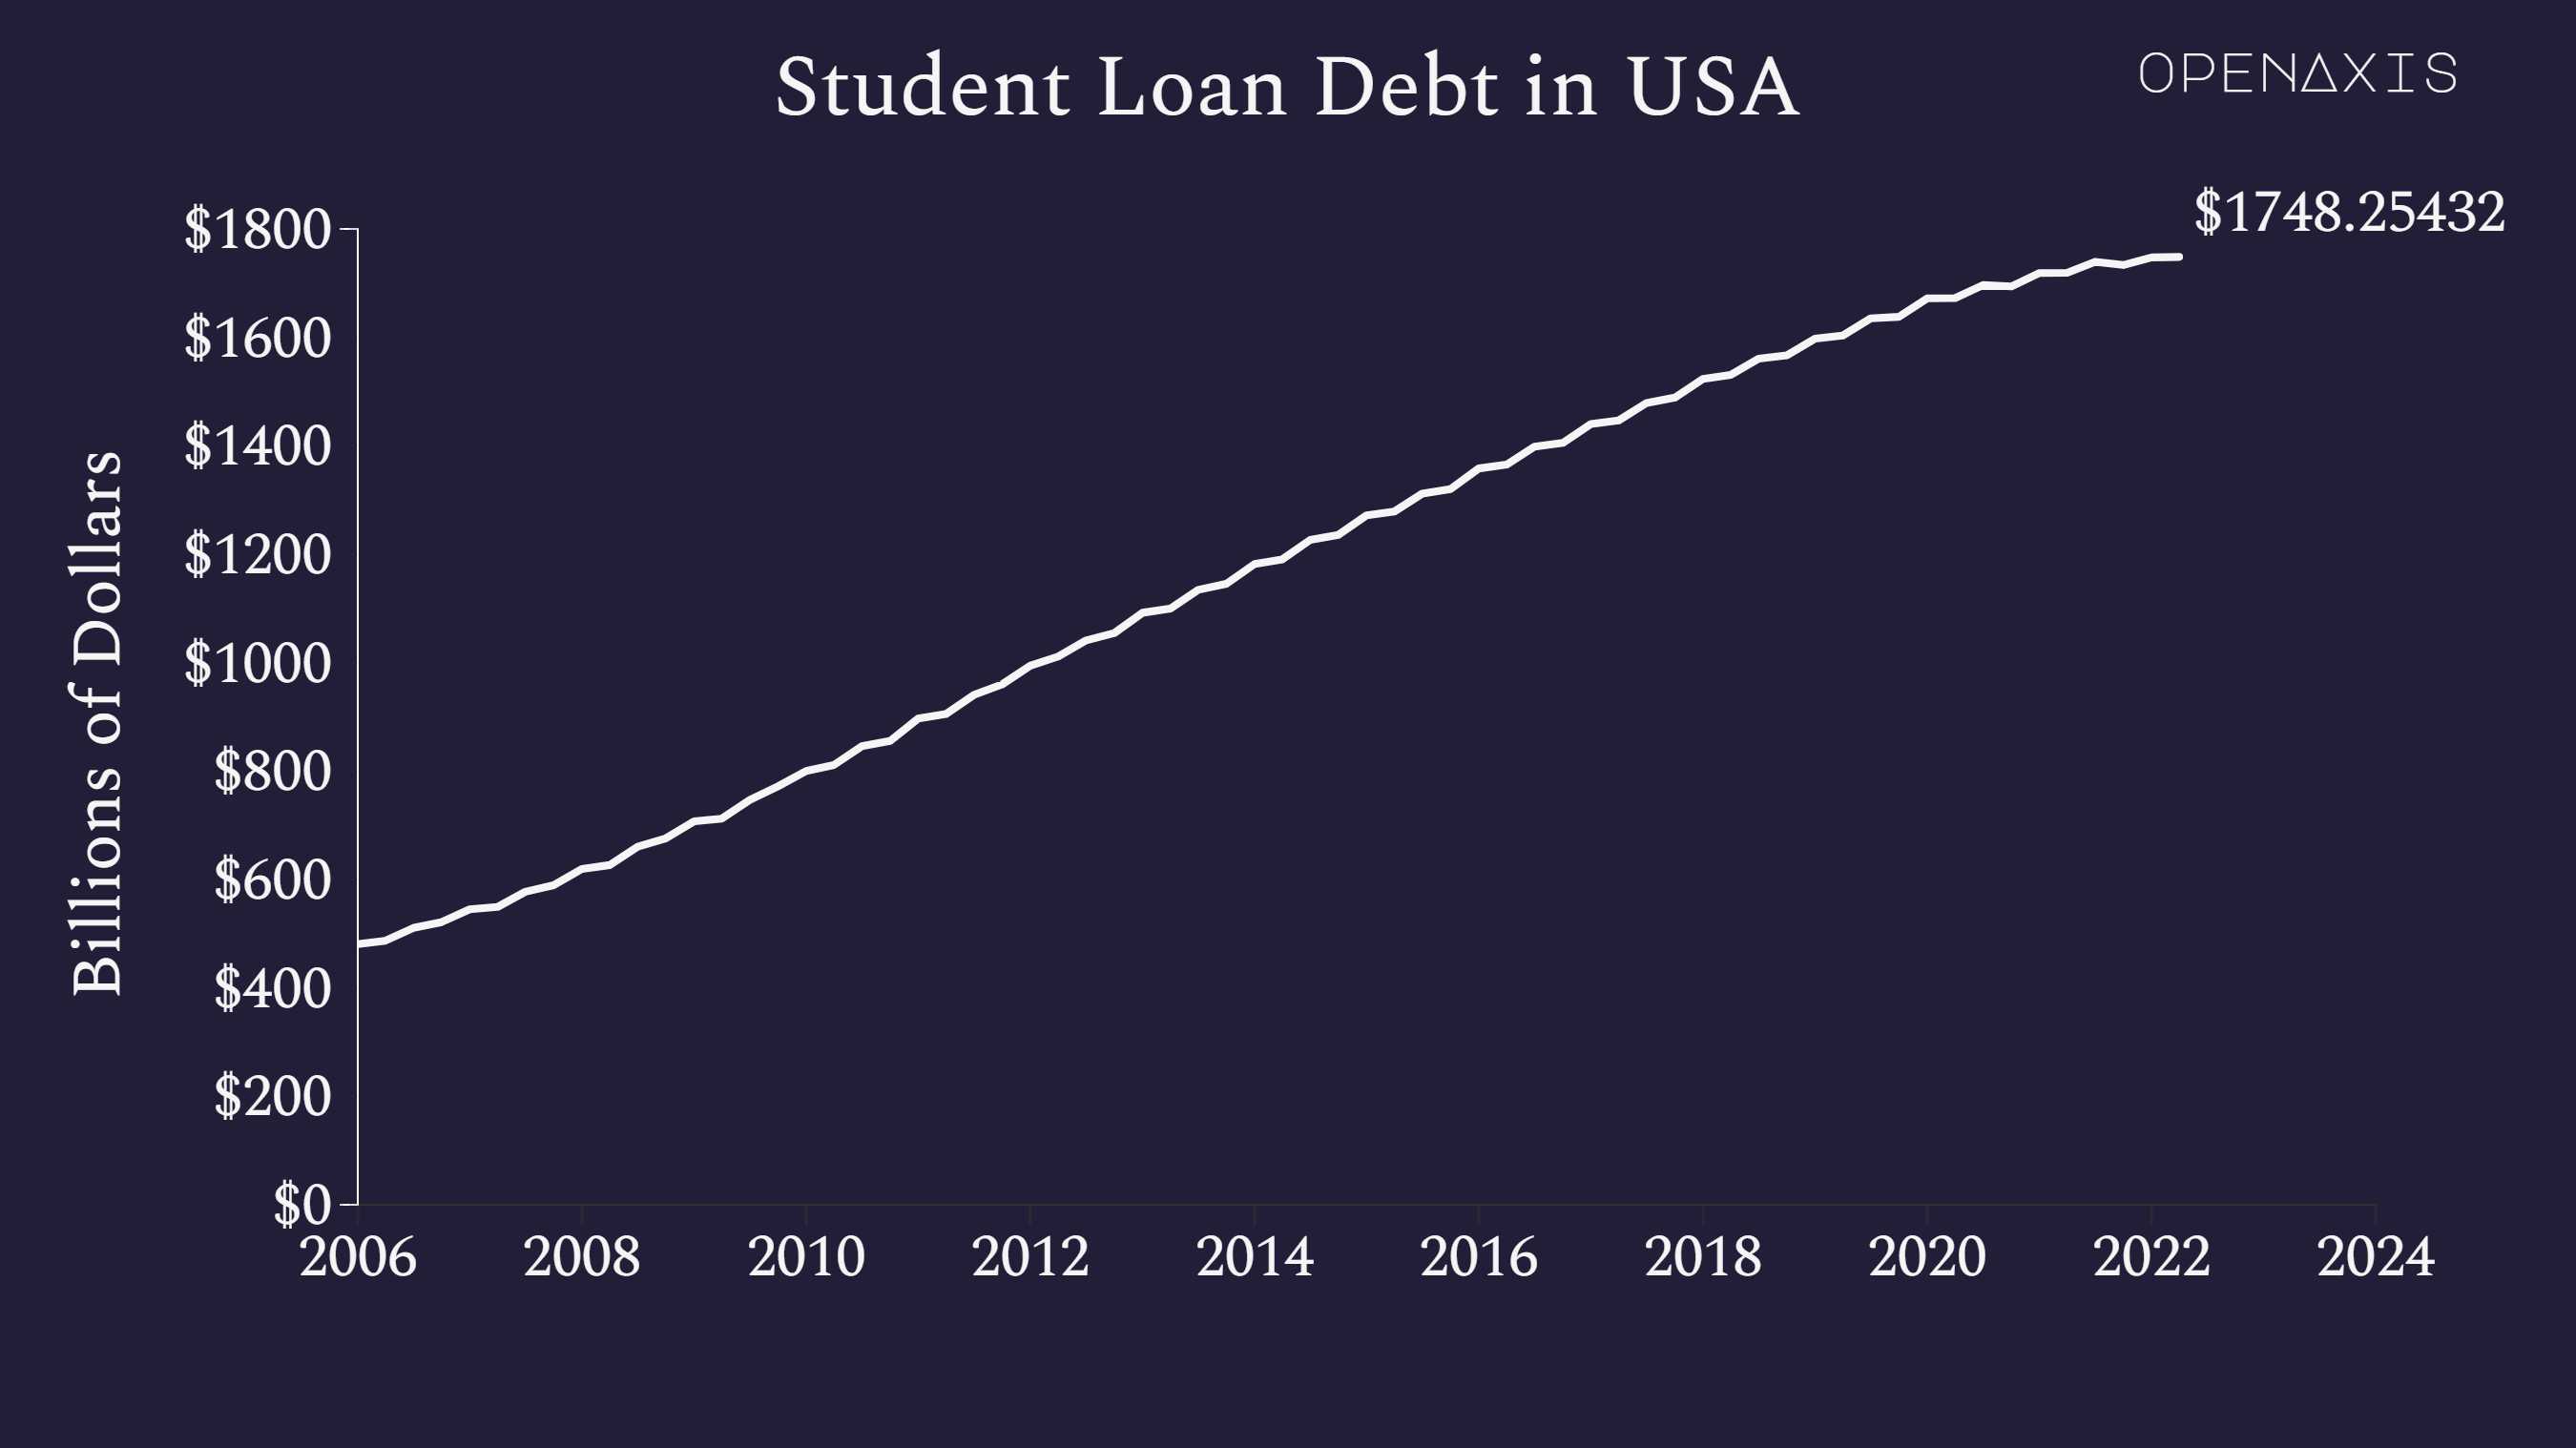 "Student Loan Debt in USA"